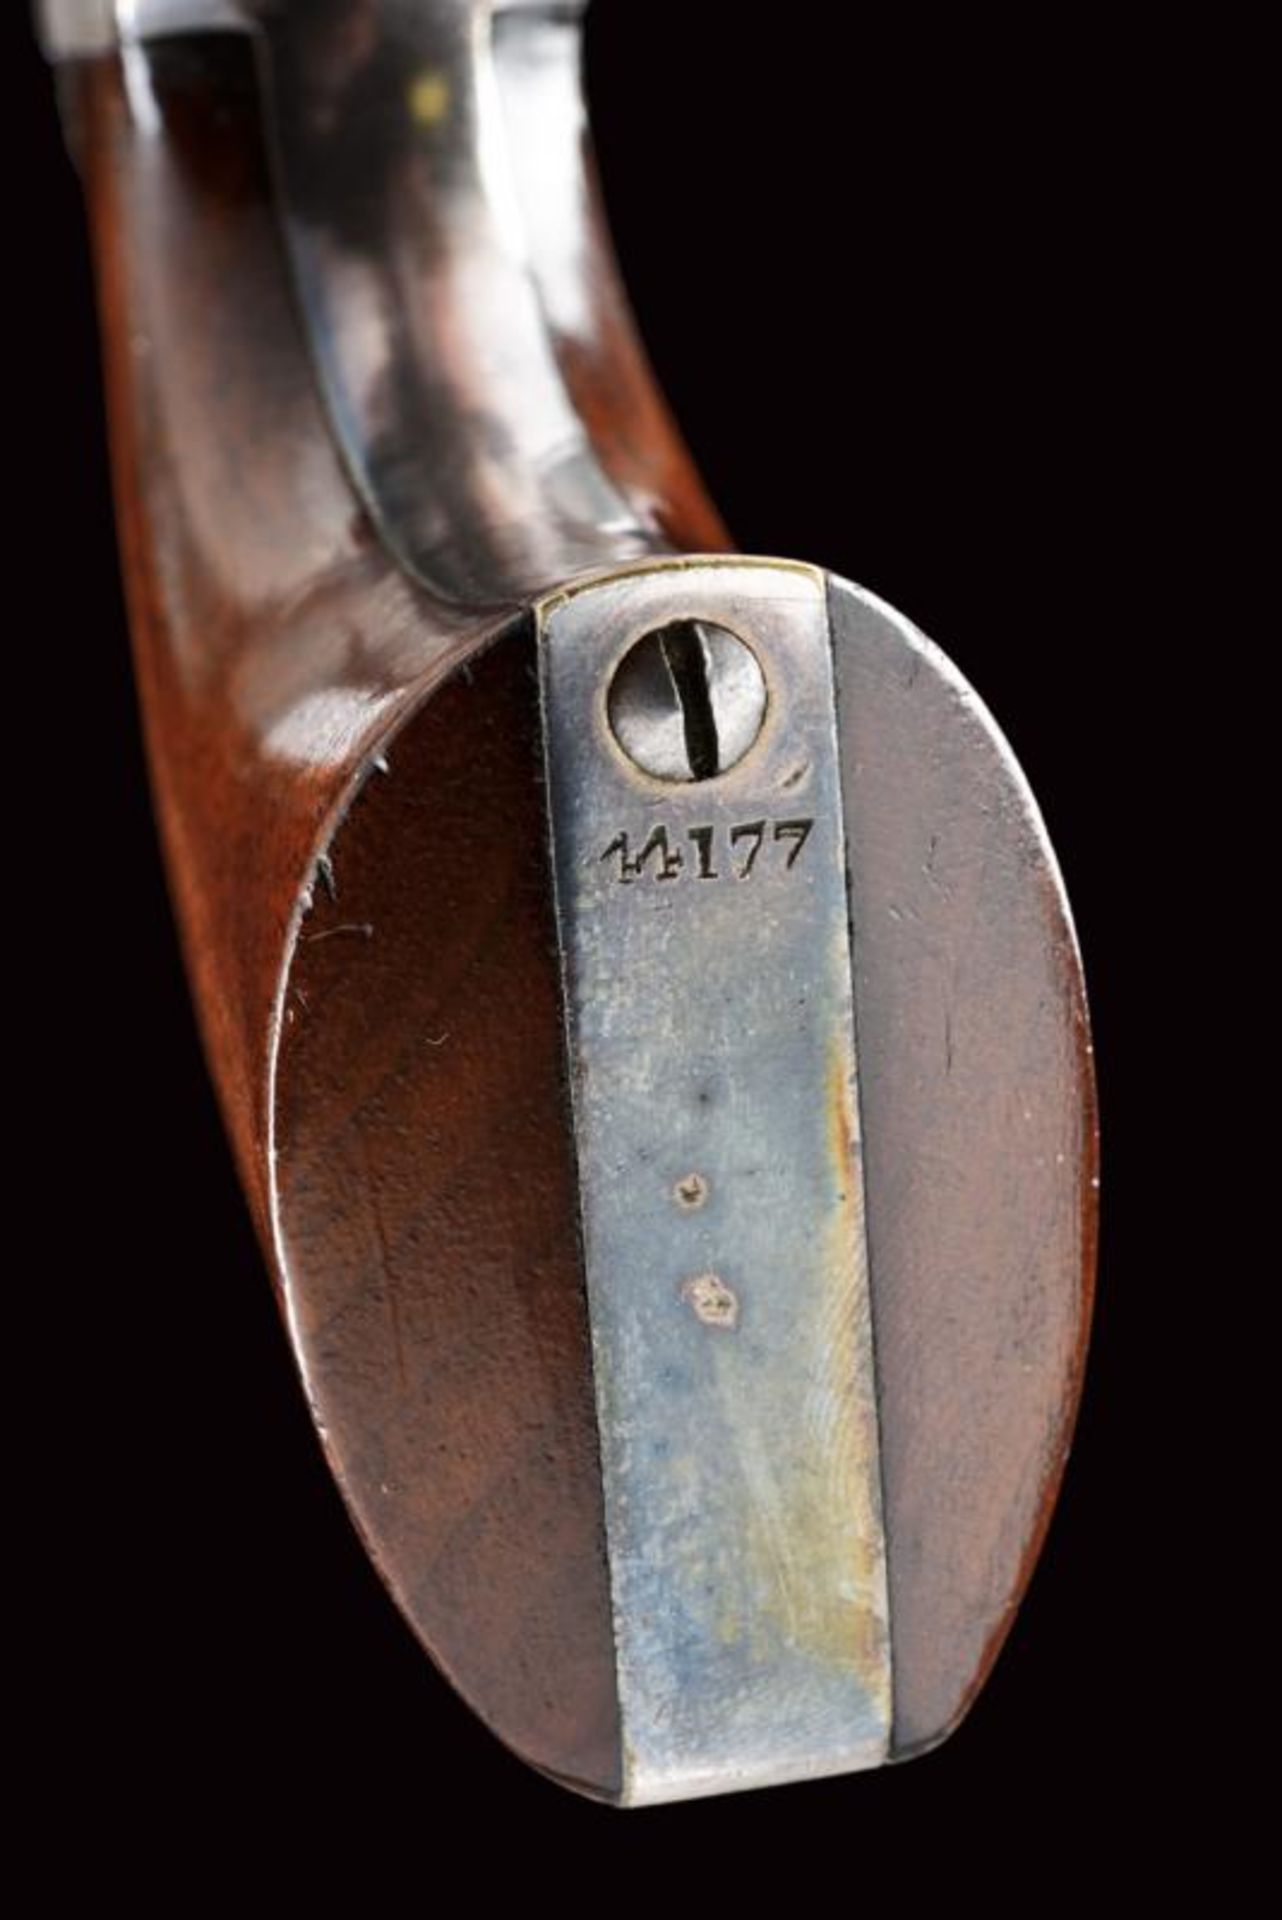 A Colt Model 1849 Pcoket Revolver with case - Image 7 of 9